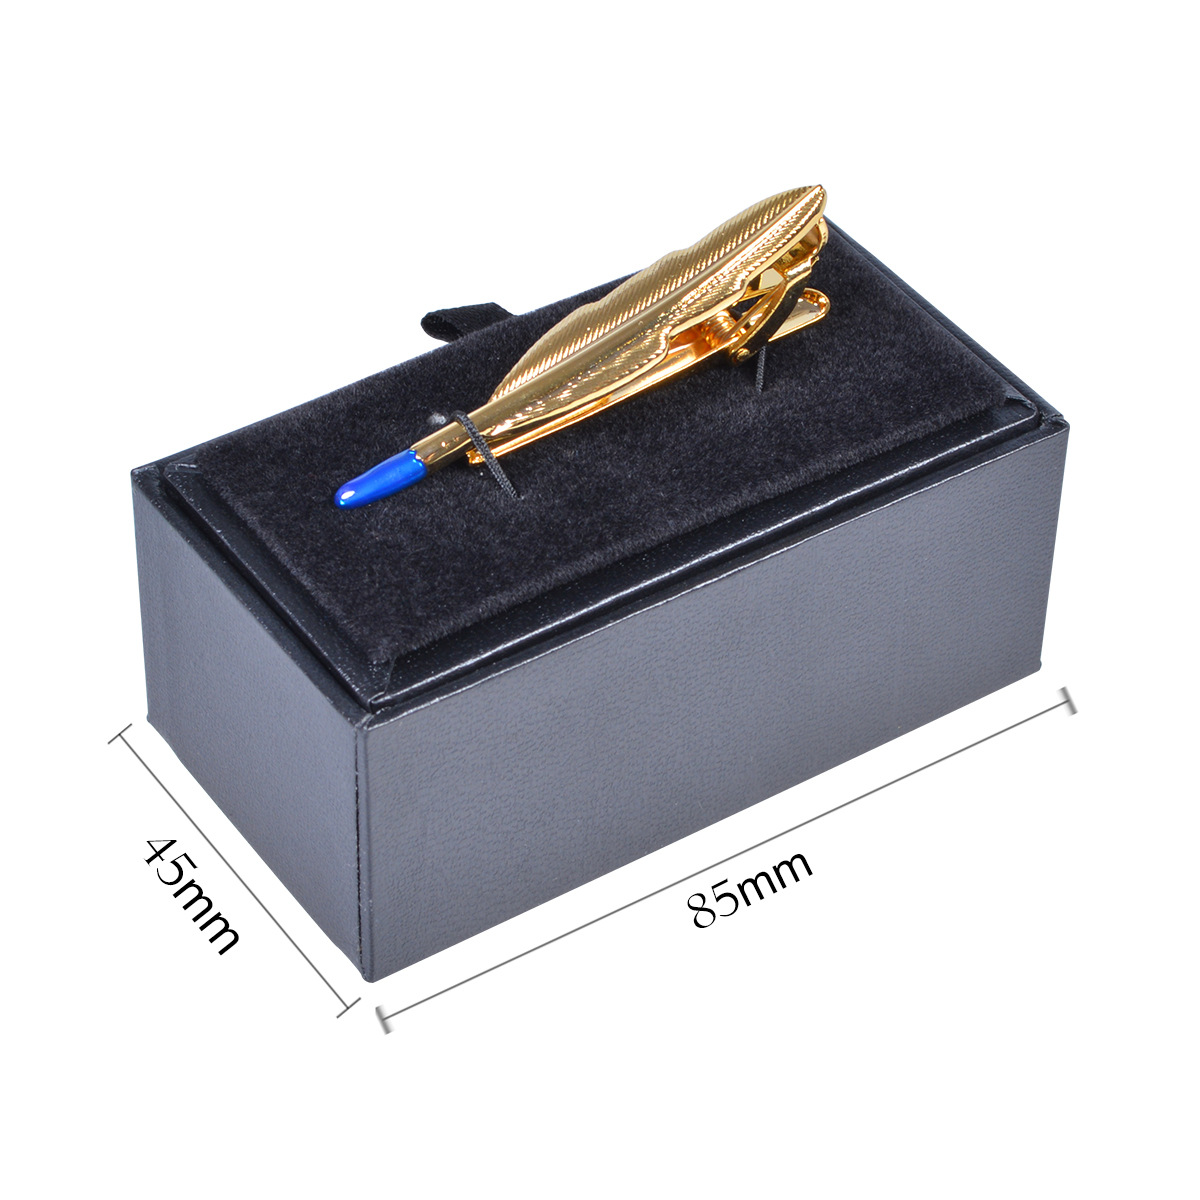 High quality tie clip box (without display)